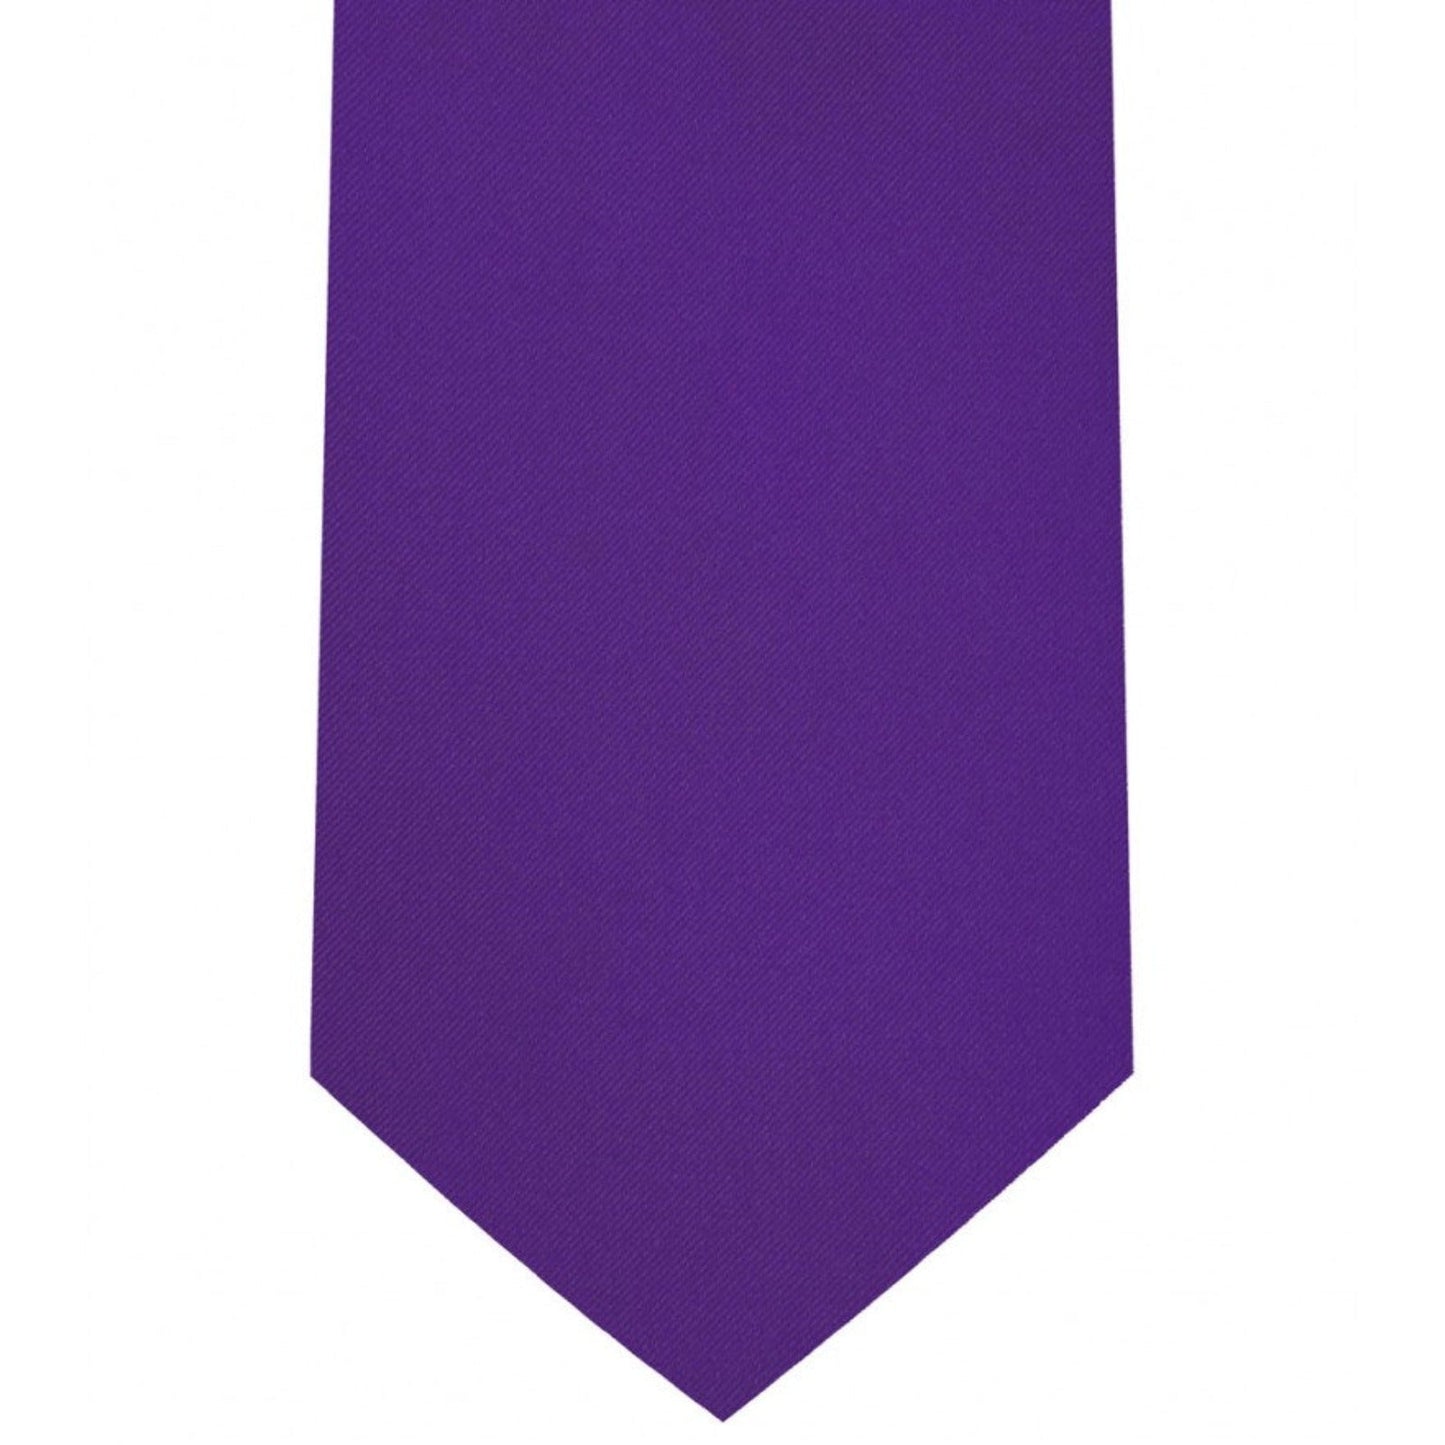 Classic Medium Purple Tie Regular width 3.5 inches With Matching Pocket Square | KCT Menswear 